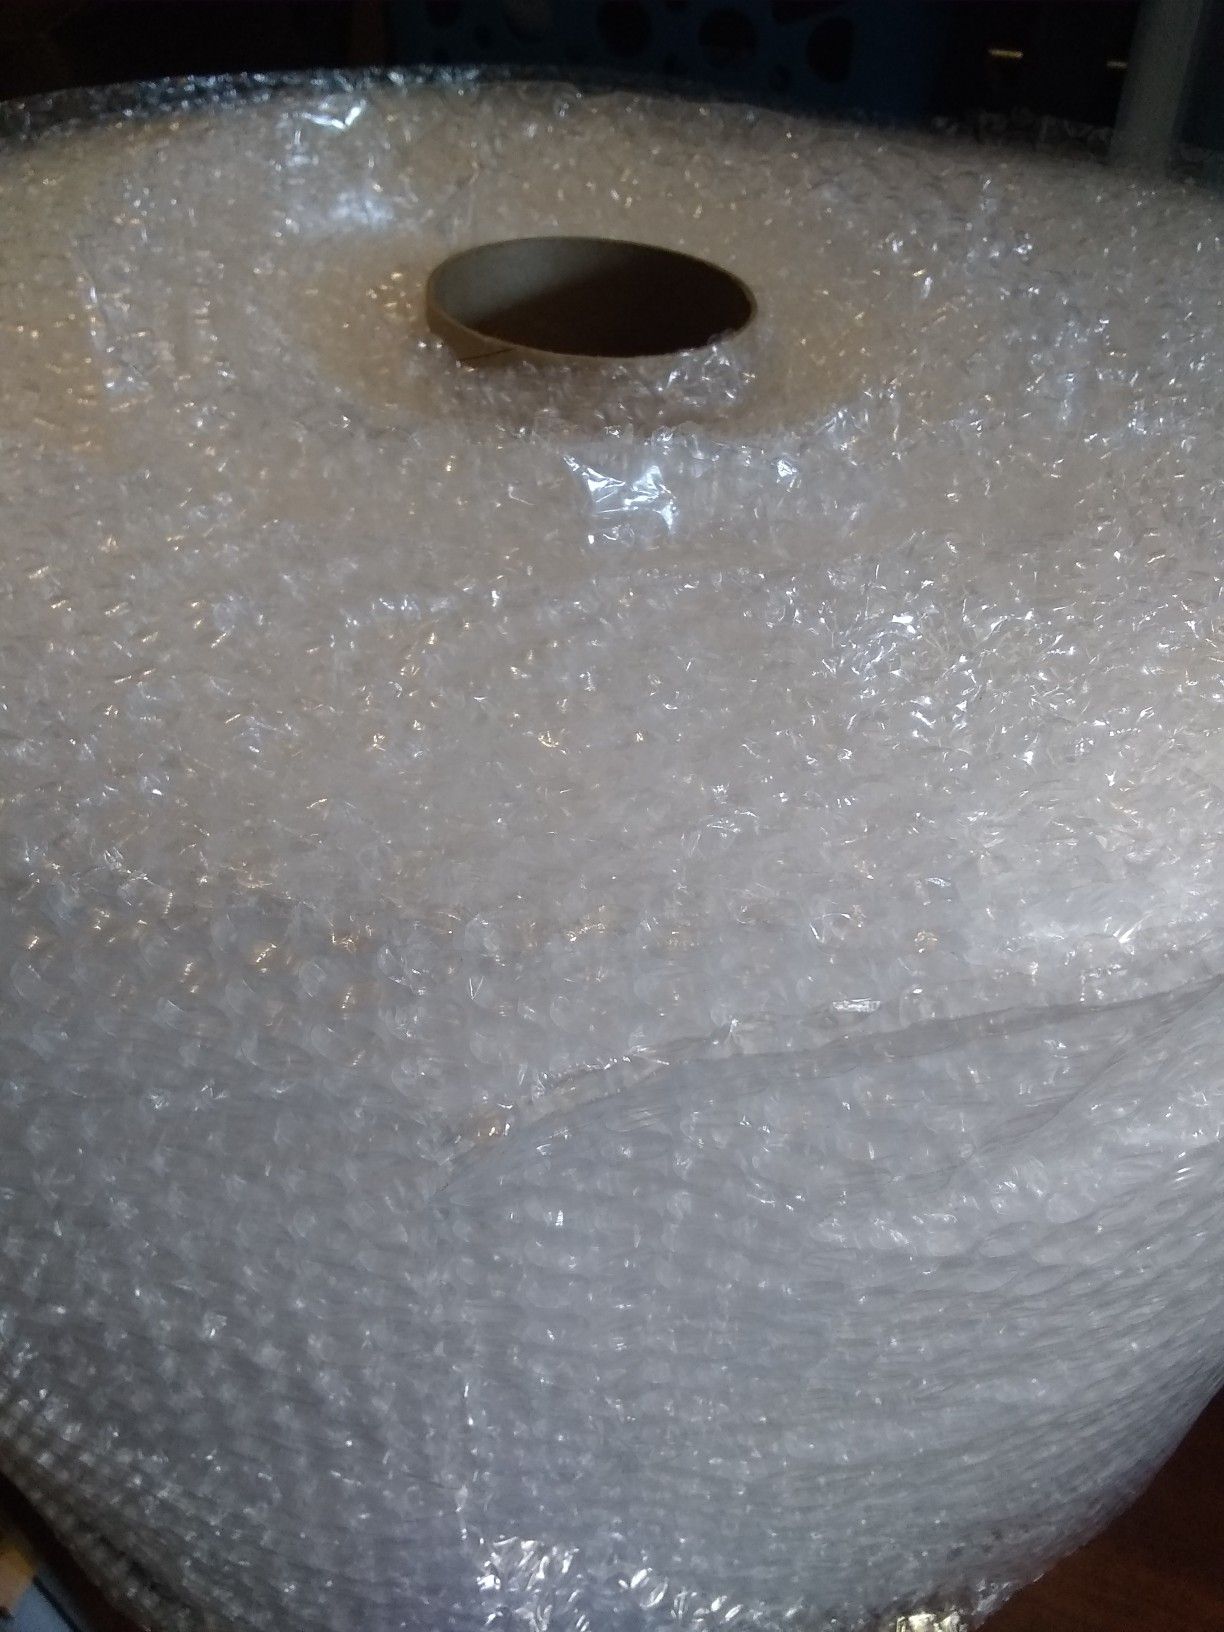 New 175' Feet x 12" Wide Perforated Every Foot Bubble Shipping Packing Wrap Cushion Roll for Boxes Moving Wrapping Padding Cushioning Protecting